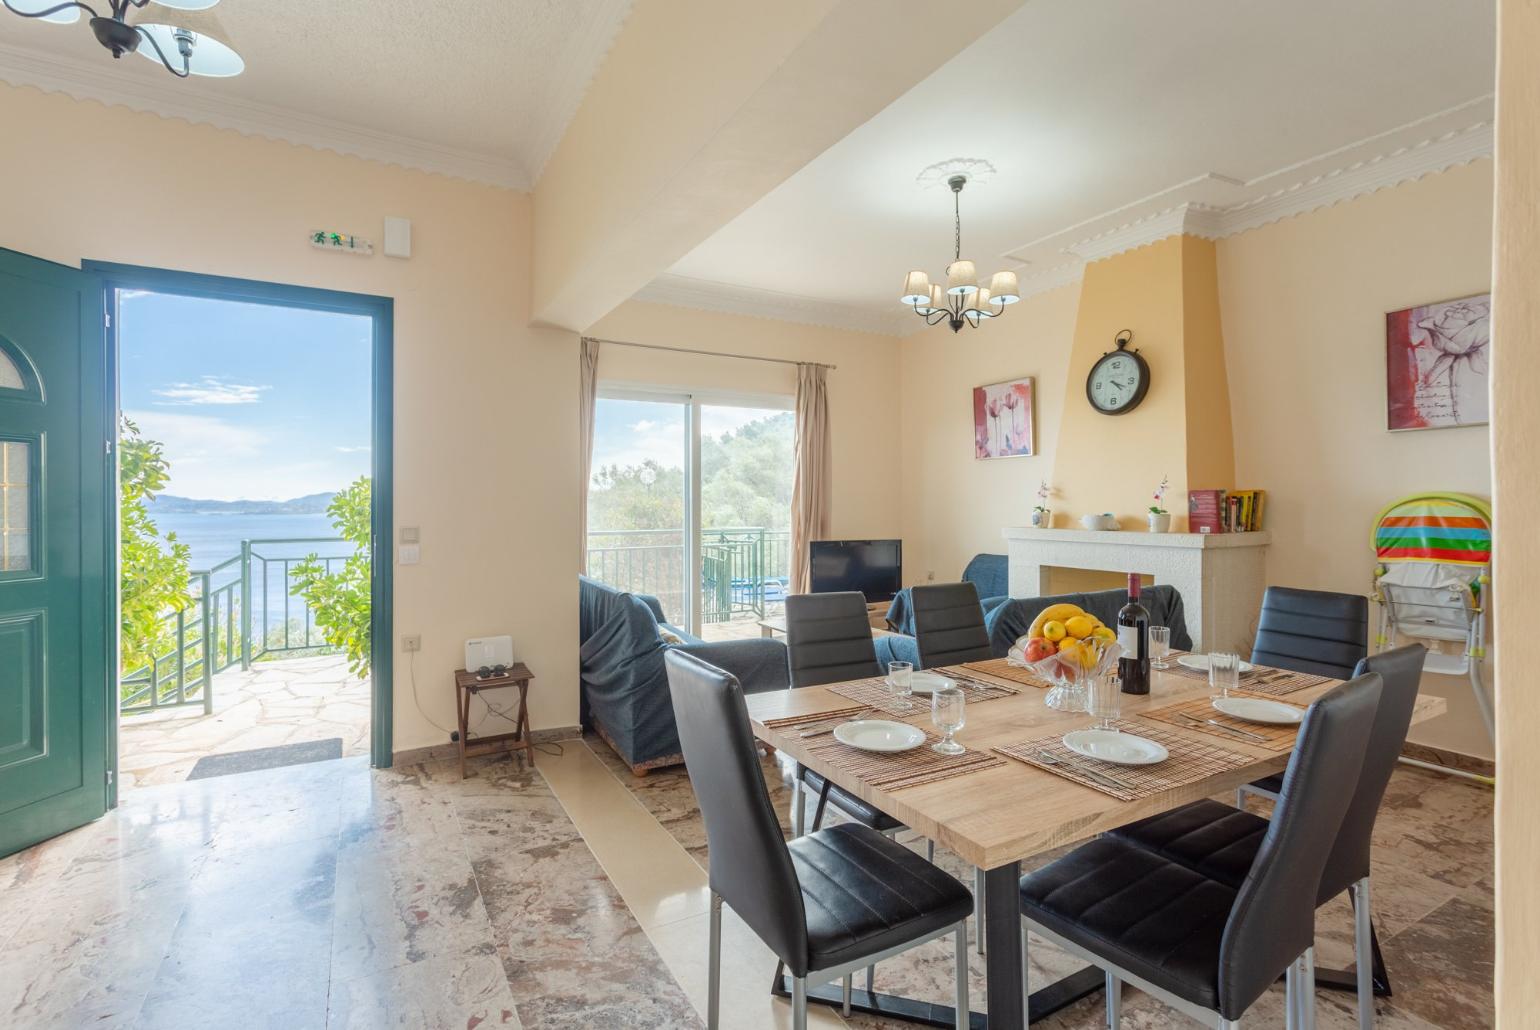 Open-plan living room with sofas, dining area, kitchen, ornamental fireplace, WiFi internet, satellite TV, DVD player, and terrace access with sea views